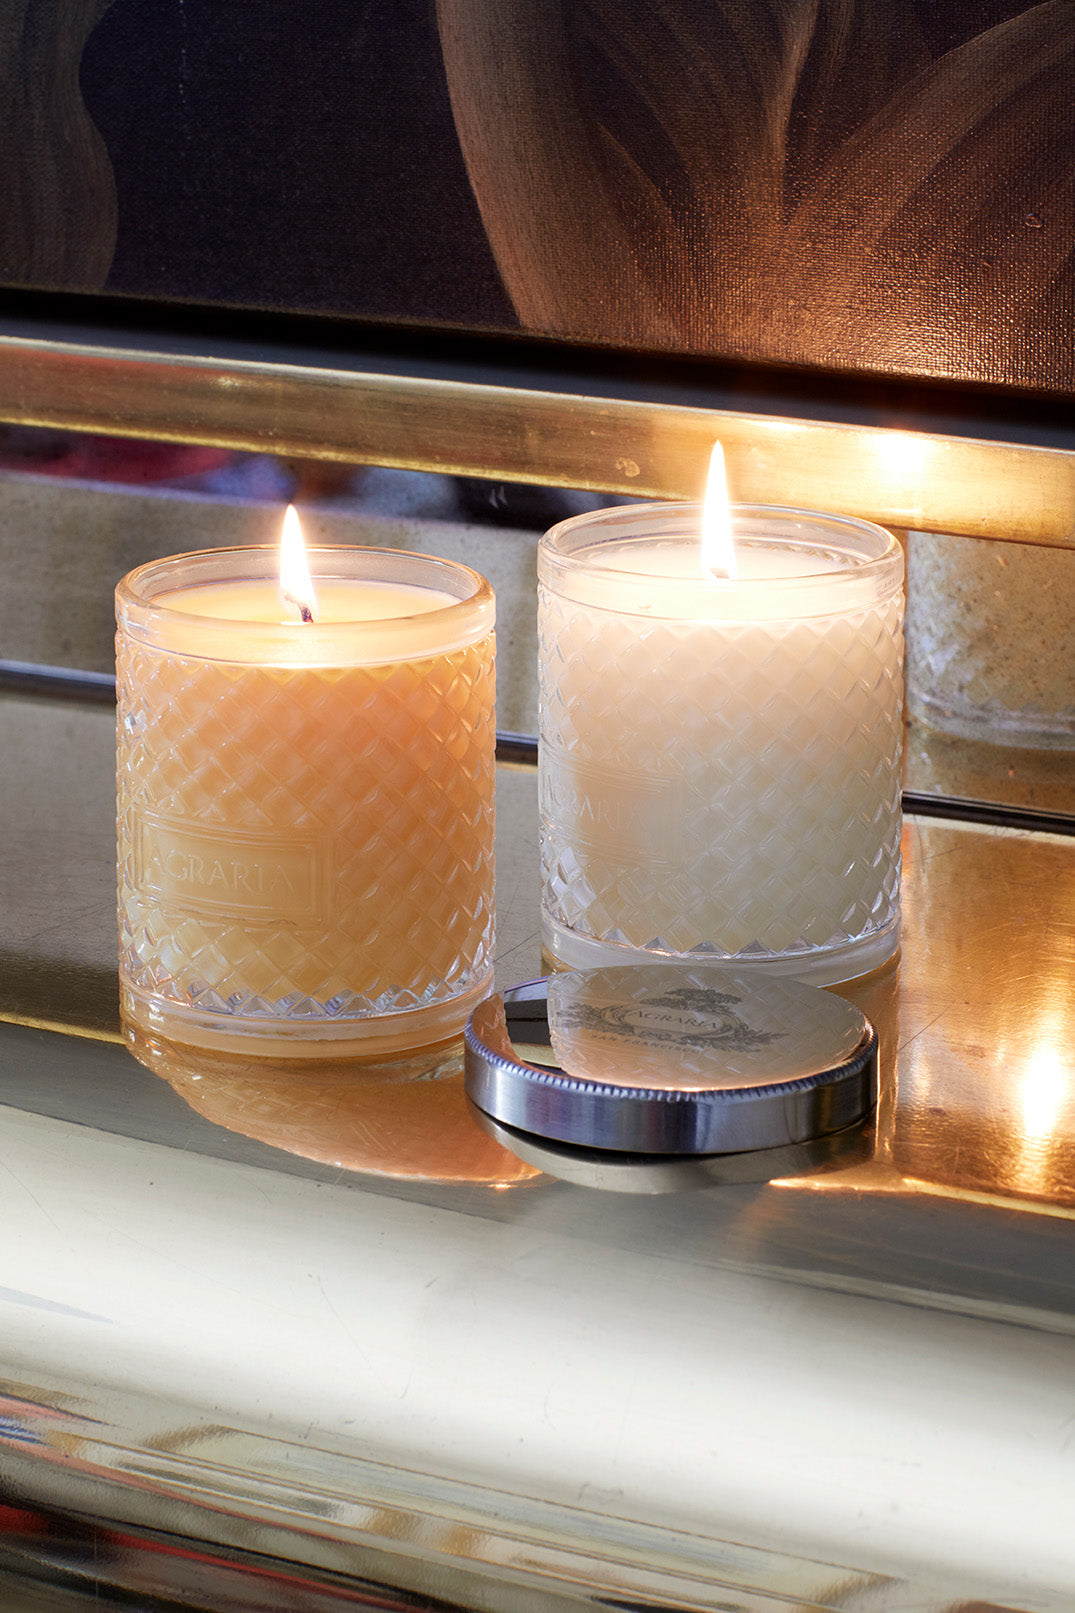 Image of 2 lit candles in glass jars